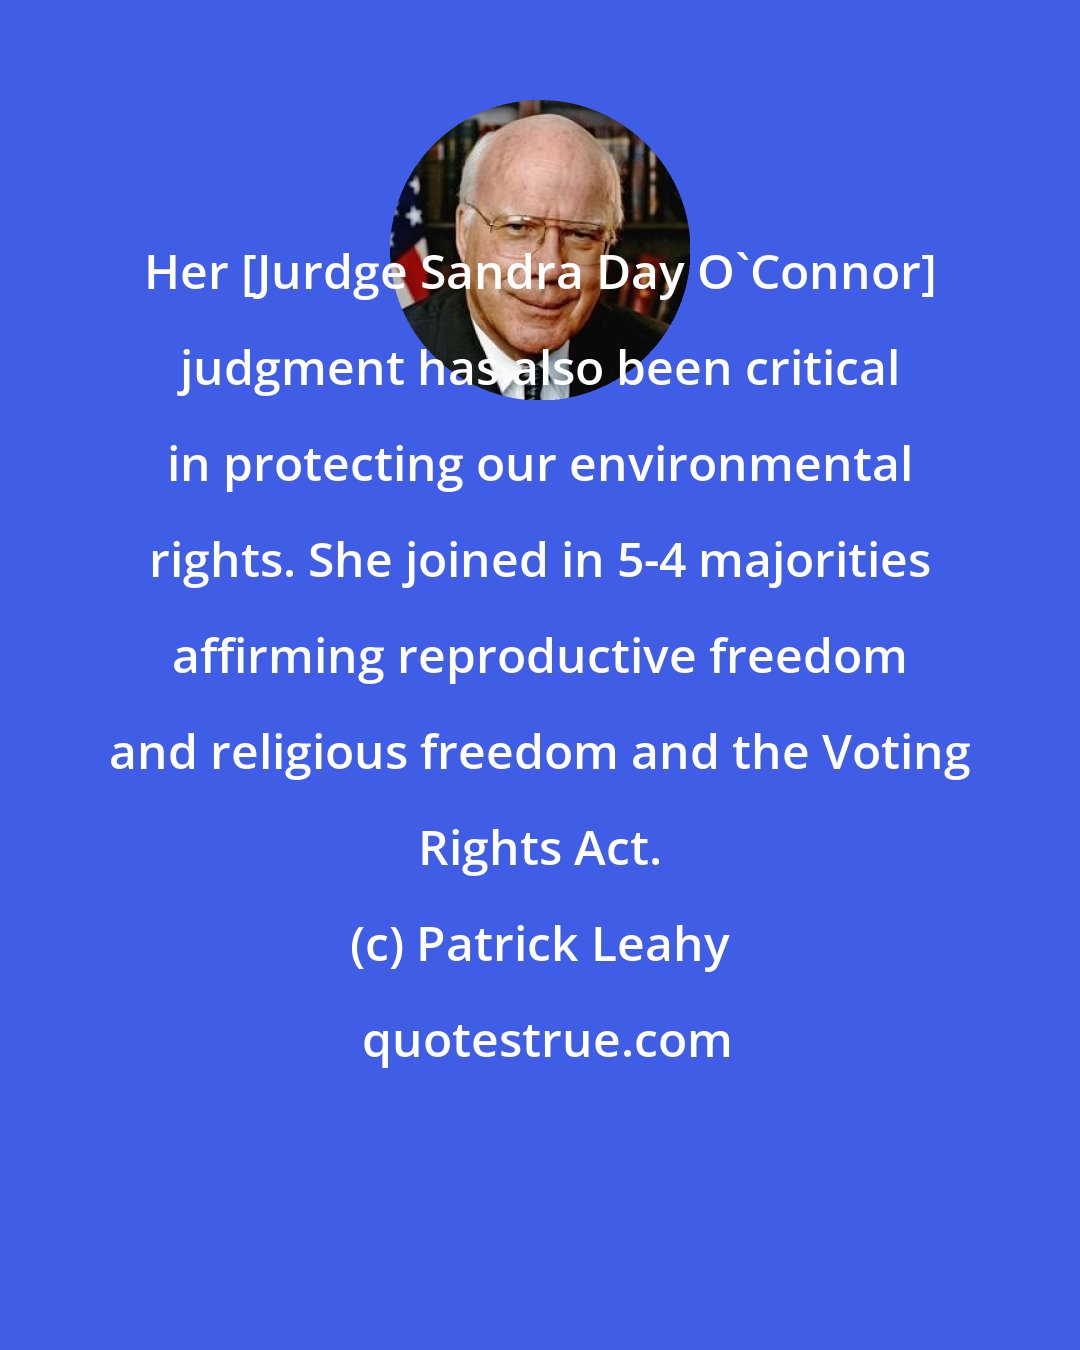 Patrick Leahy: Her [Jurdge Sandra Day O'Connor] judgment has also been critical in protecting our environmental rights. She joined in 5-4 majorities affirming reproductive freedom and religious freedom and the Voting Rights Act.